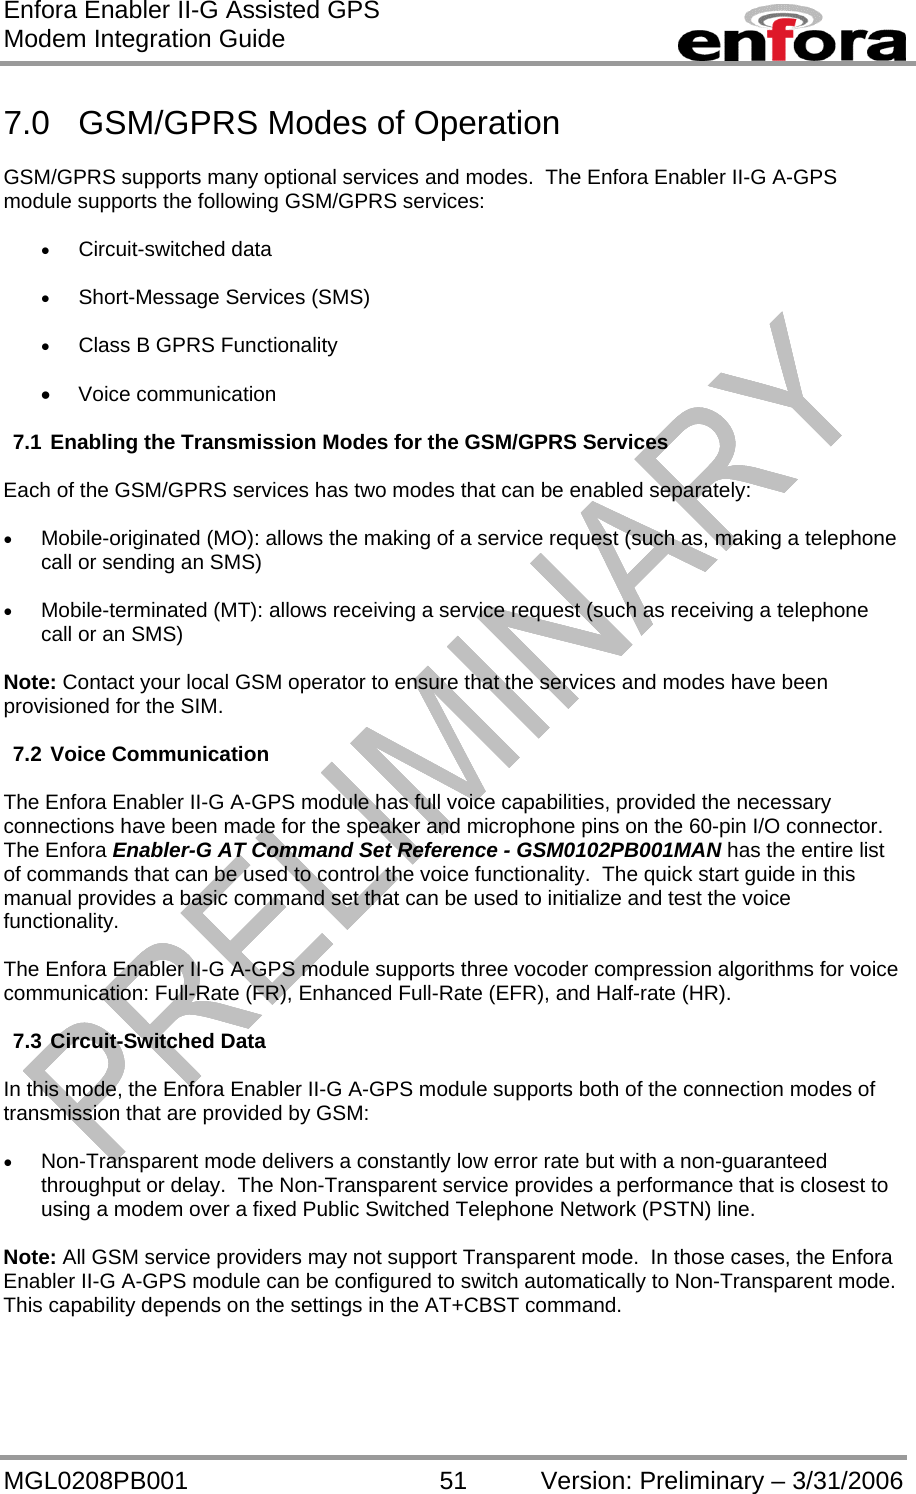 Enfora Enabler II-G Assisted GPS Modem Integration Guide MGL0208PB001 51 Version: Preliminary – 3/31/2006  7.0  GSM/GPRS Modes of Operation  GSM/GPRS supports many optional services and modes.  The Enfora Enabler II-G A-GPS module supports the following GSM/GPRS services:  •  Circuit-switched data  •  Short-Message Services (SMS)  •  Class B GPRS Functionality  •  Voice communication  7.1 Enabling the Transmission Modes for the GSM/GPRS Services  Each of the GSM/GPRS services has two modes that can be enabled separately:  •  Mobile-originated (MO): allows the making of a service request (such as, making a telephone call or sending an SMS)  •  Mobile-terminated (MT): allows receiving a service request (such as receiving a telephone call or an SMS)  Note: Contact your local GSM operator to ensure that the services and modes have been provisioned for the SIM.  7.2 Voice Communication  The Enfora Enabler II-G A-GPS module has full voice capabilities, provided the necessary connections have been made for the speaker and microphone pins on the 60-pin I/O connector.  The Enfora Enabler-G AT Command Set Reference - GSM0102PB001MAN has the entire list of commands that can be used to control the voice functionality.  The quick start guide in this manual provides a basic command set that can be used to initialize and test the voice functionality.  The Enfora Enabler II-G A-GPS module supports three vocoder compression algorithms for voice communication: Full-Rate (FR), Enhanced Full-Rate (EFR), and Half-rate (HR).  7.3 Circuit-Switched Data  In this mode, the Enfora Enabler II-G A-GPS module supports both of the connection modes of transmission that are provided by GSM:  •  Non-Transparent mode delivers a constantly low error rate but with a non-guaranteed throughput or delay.  The Non-Transparent service provides a performance that is closest to using a modem over a fixed Public Switched Telephone Network (PSTN) line.  Note: All GSM service providers may not support Transparent mode.  In those cases, the Enfora Enabler II-G A-GPS module can be configured to switch automatically to Non-Transparent mode.  This capability depends on the settings in the AT+CBST command.  